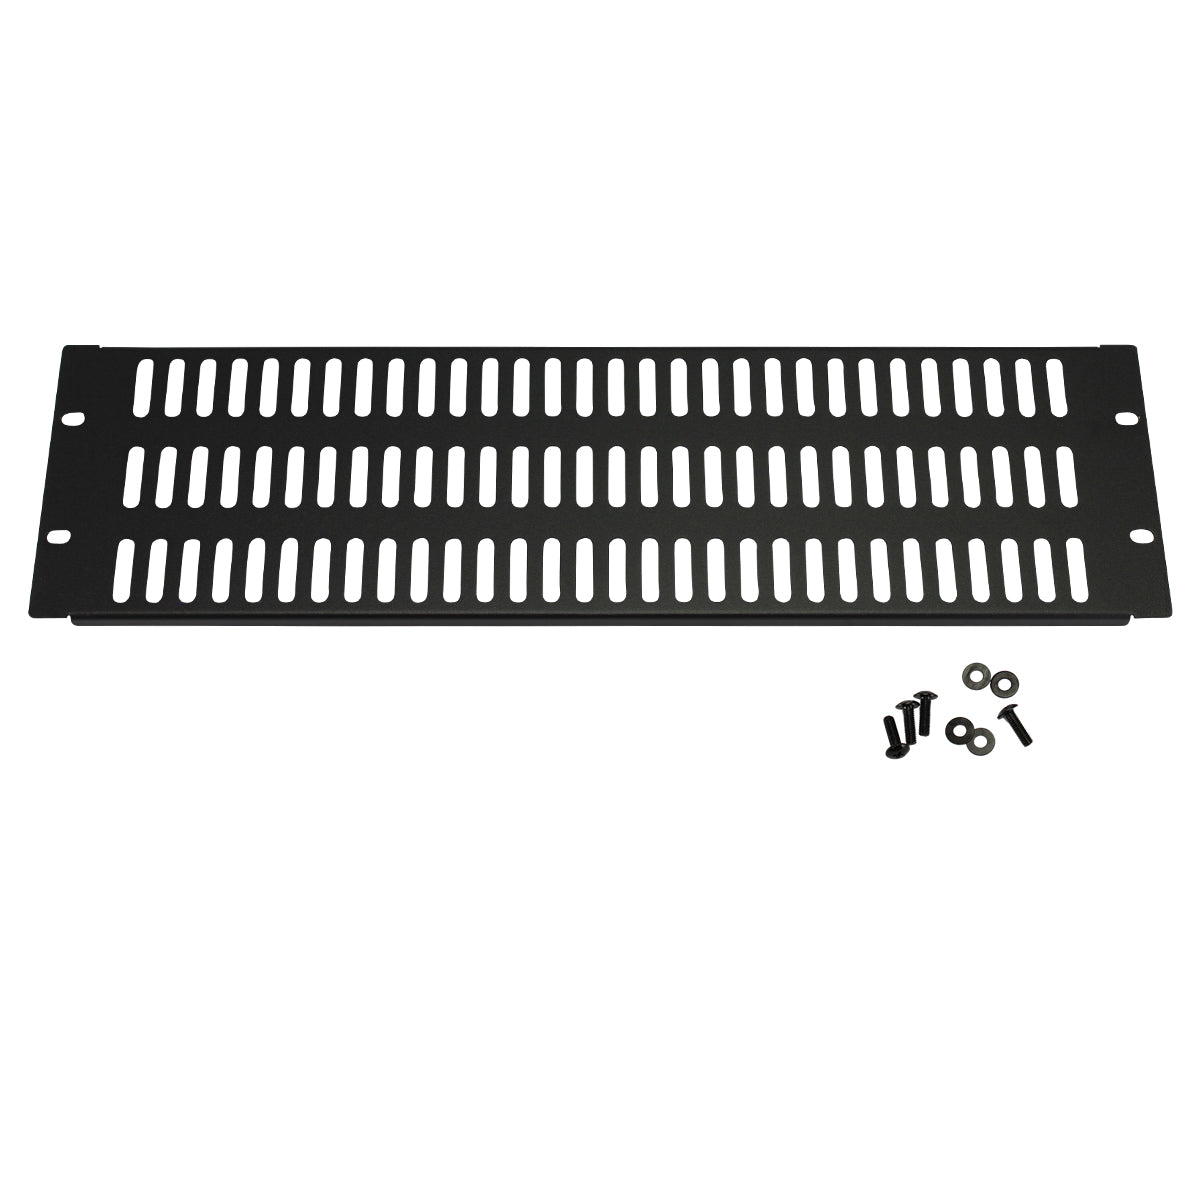 3U Rack Metal Vented Panel for 19in Server Racks and Cabinets